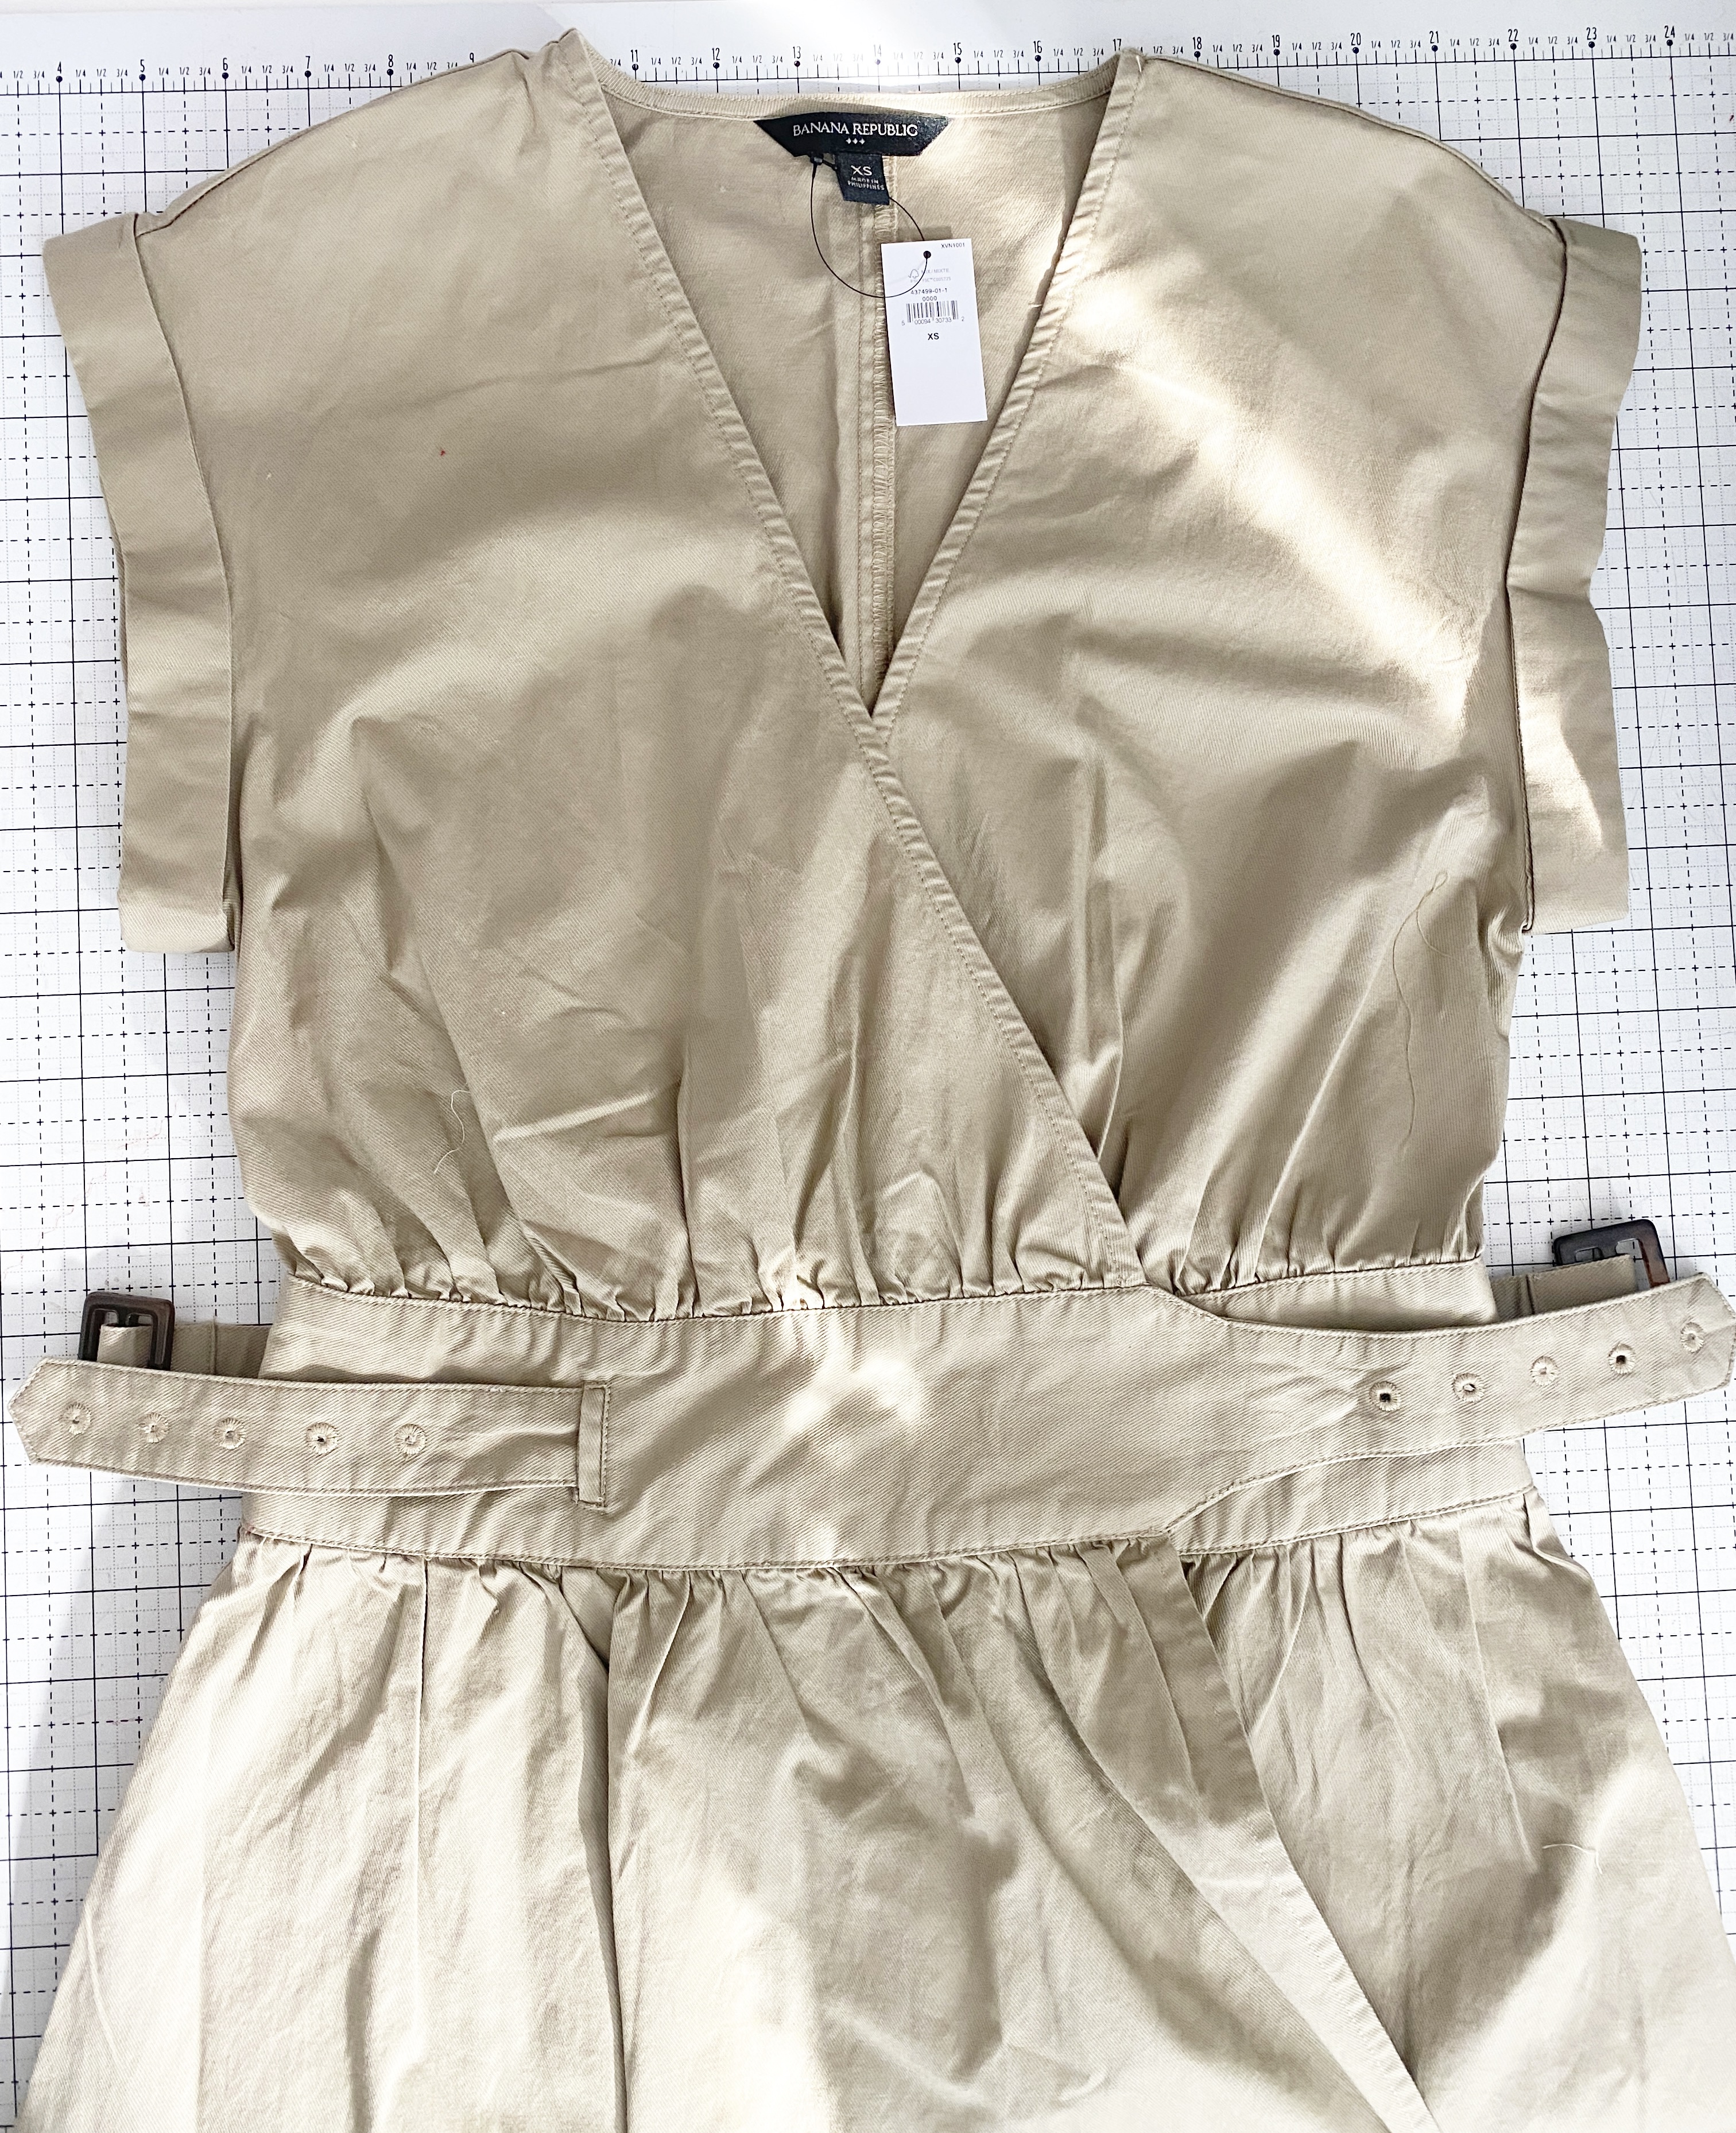 How To Add An Eyelet To Ready-Made Garment: Before amending